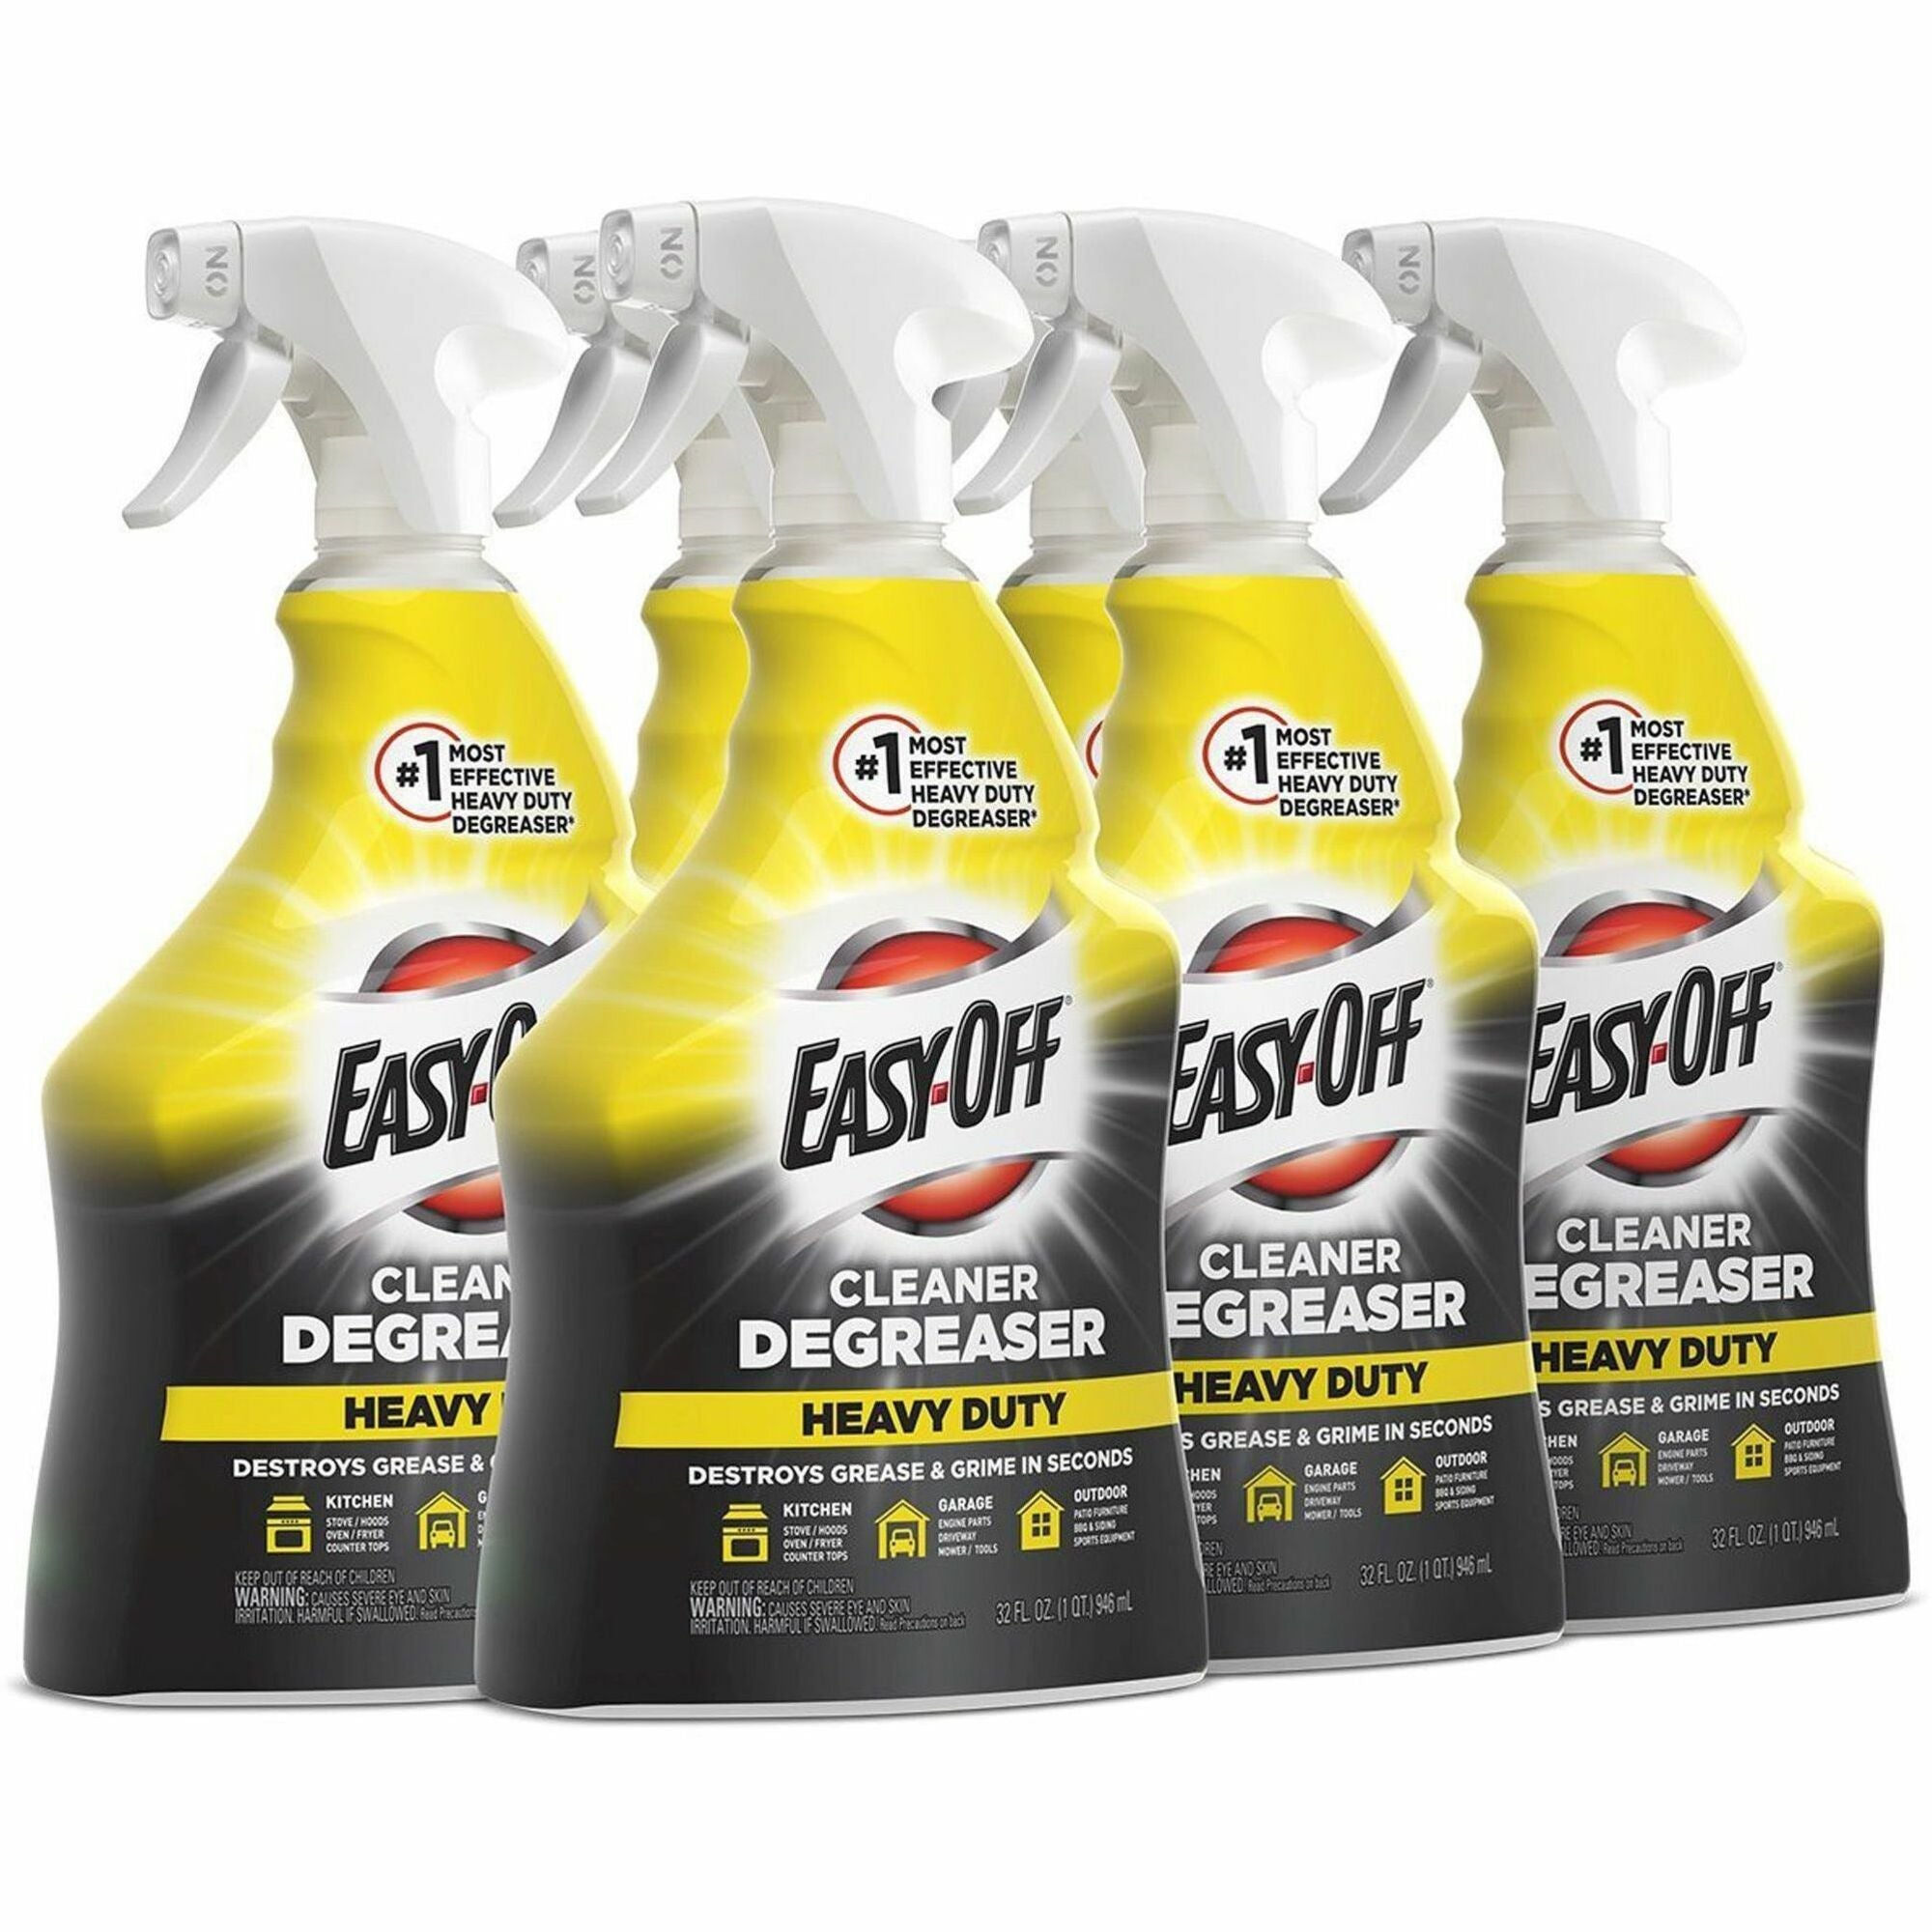 easy-off-cleaner-degreaser-ready-to-use-32-fl-oz-1-quart-6-carton-heavy-duty-clear_rac99624ct - 1